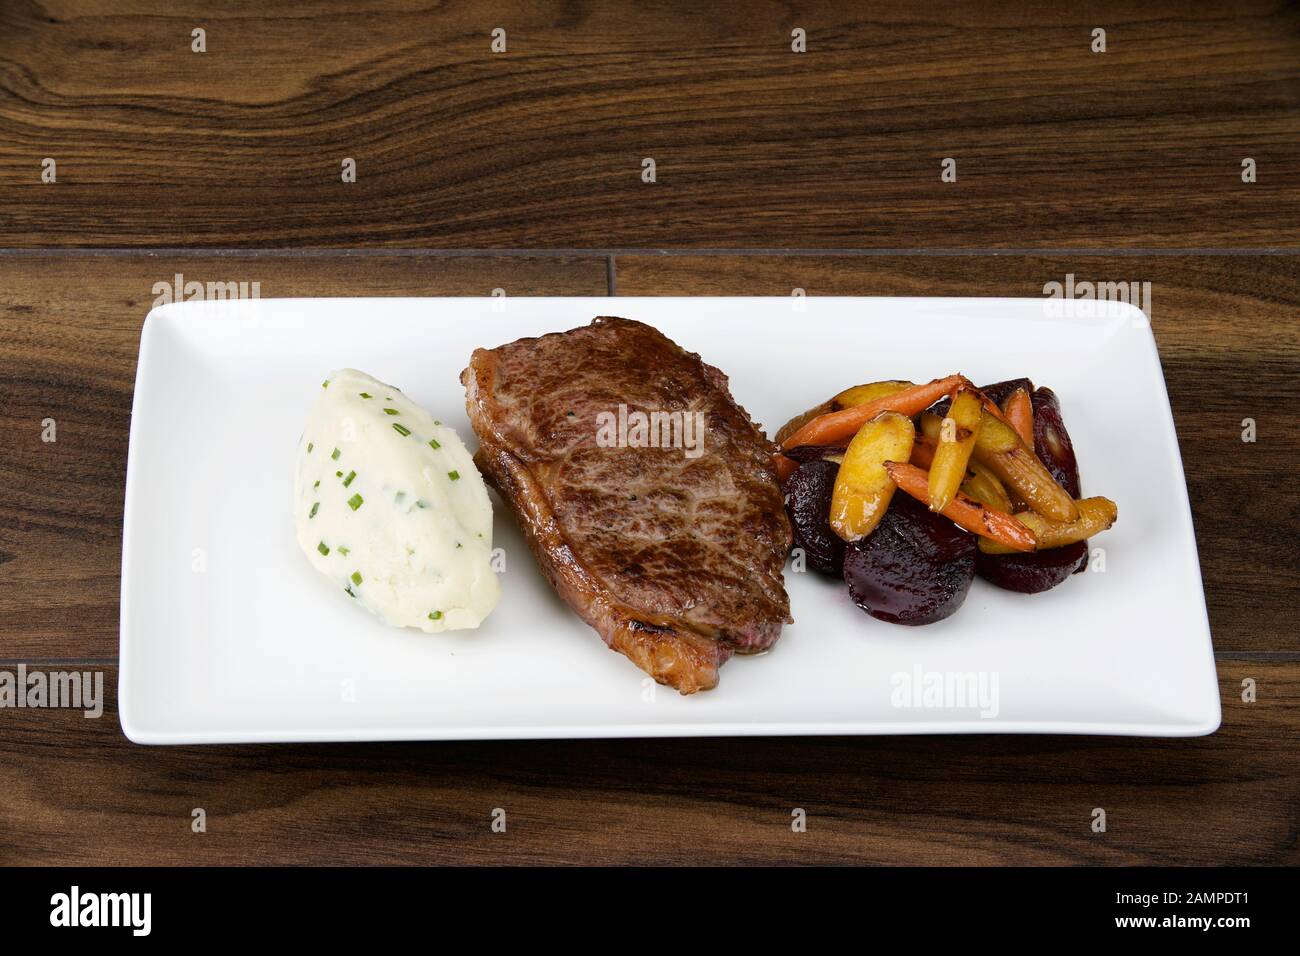 Irish sirloin beef steak served with creamy mashed potatoes and roasted vegetables. Stock Photo